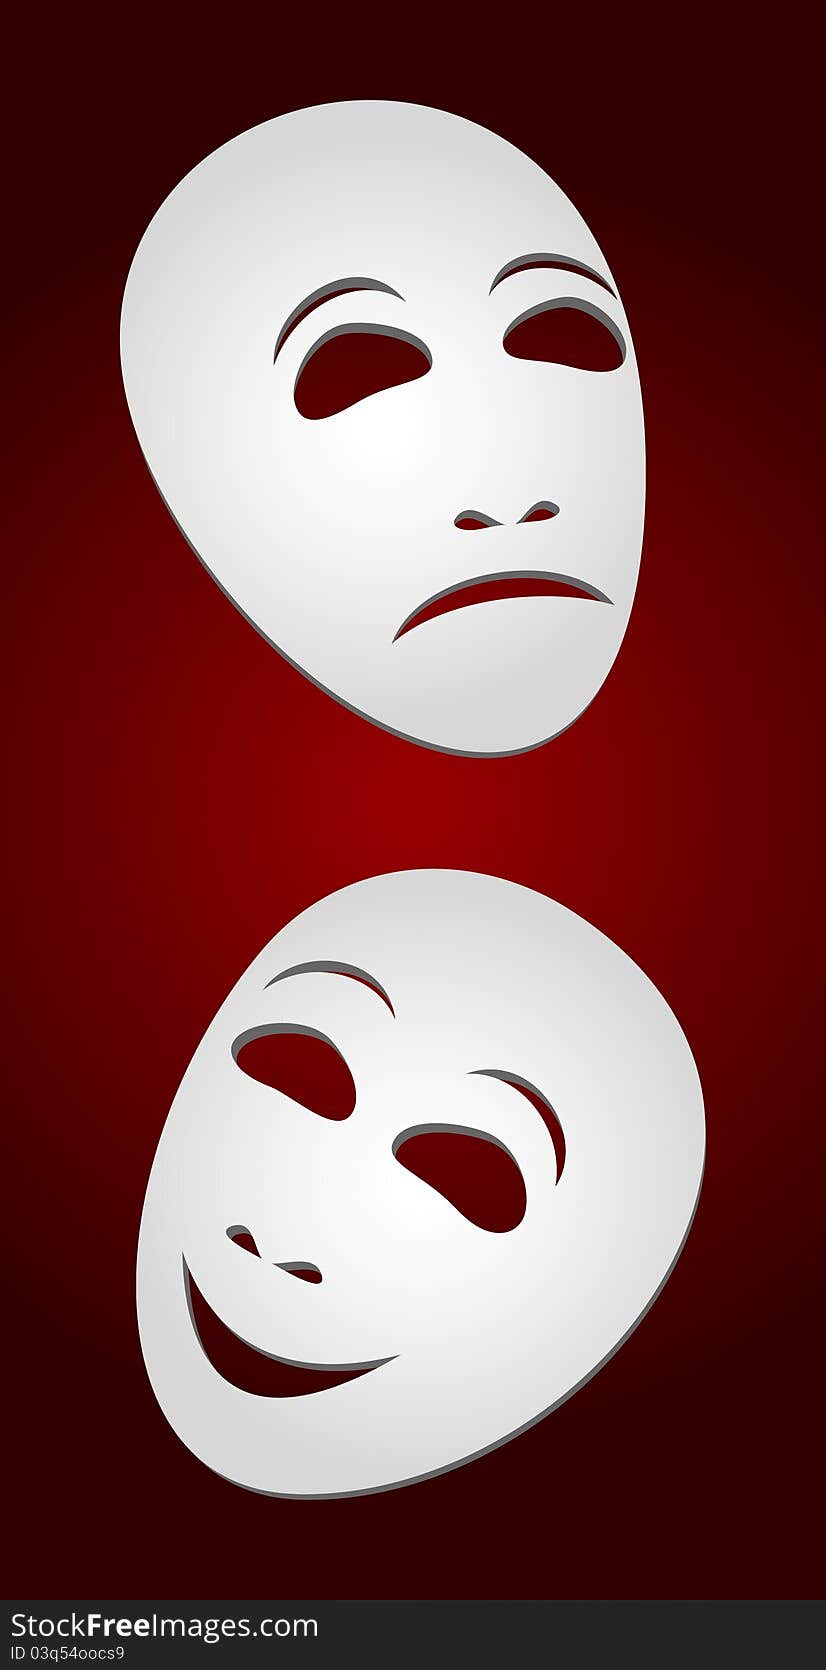 Two white theatrical masks on a red background. Masks represent tragedy and a comedy. Two white theatrical masks on a red background. Masks represent tragedy and a comedy.